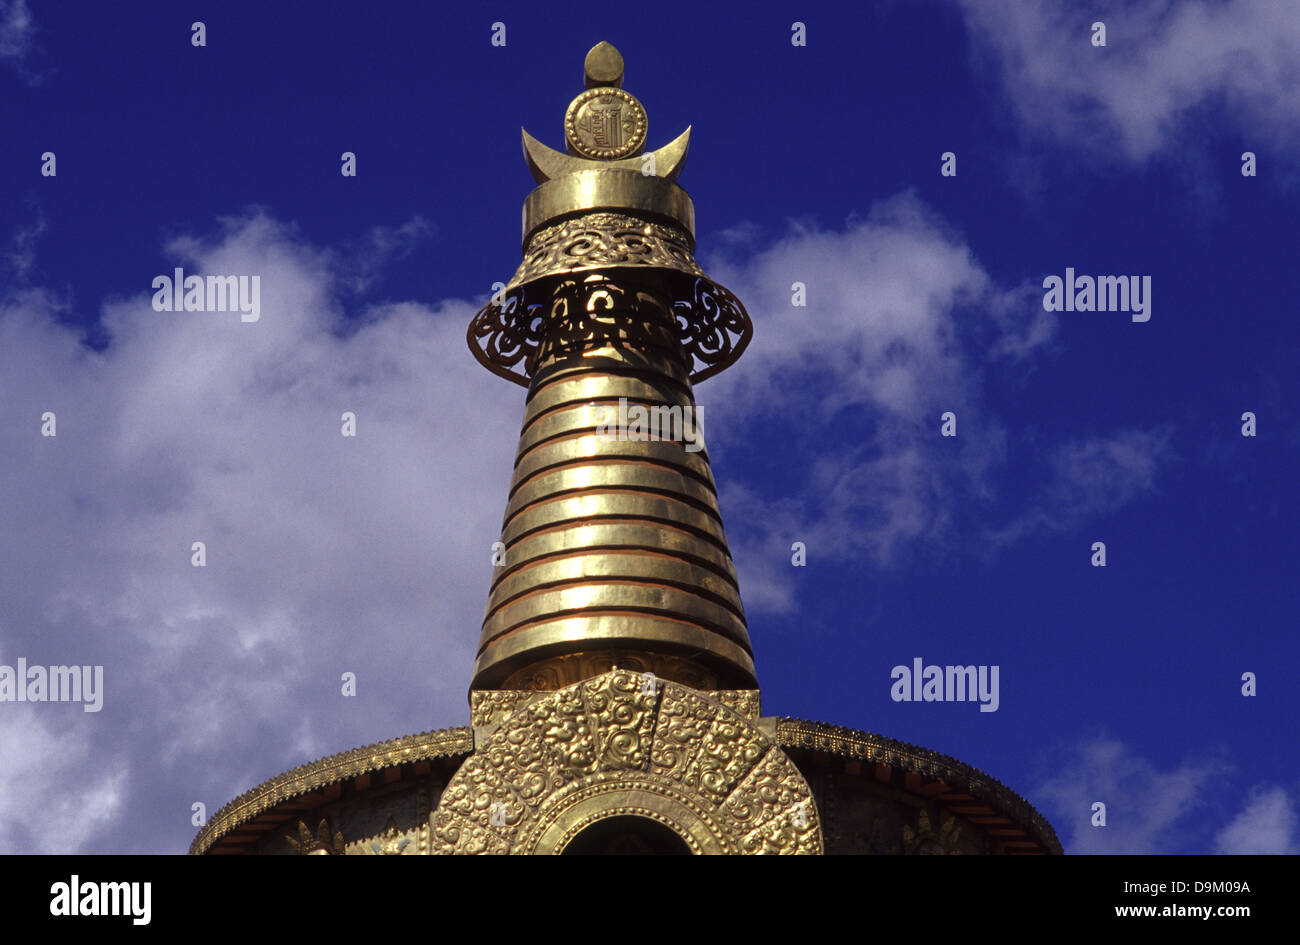 Finial ornament of Budhist Gong Tang pagoda in Labuleng Si or Labrang monastery one of the six great monasteries of the Gelug school of Tibetan Buddhism located at the foot of the Phoenix Mountain northwest of Xiahe County in Gannan Tibetan Nationality Autonomous Prefecture, Gansu Province China Stock Photo